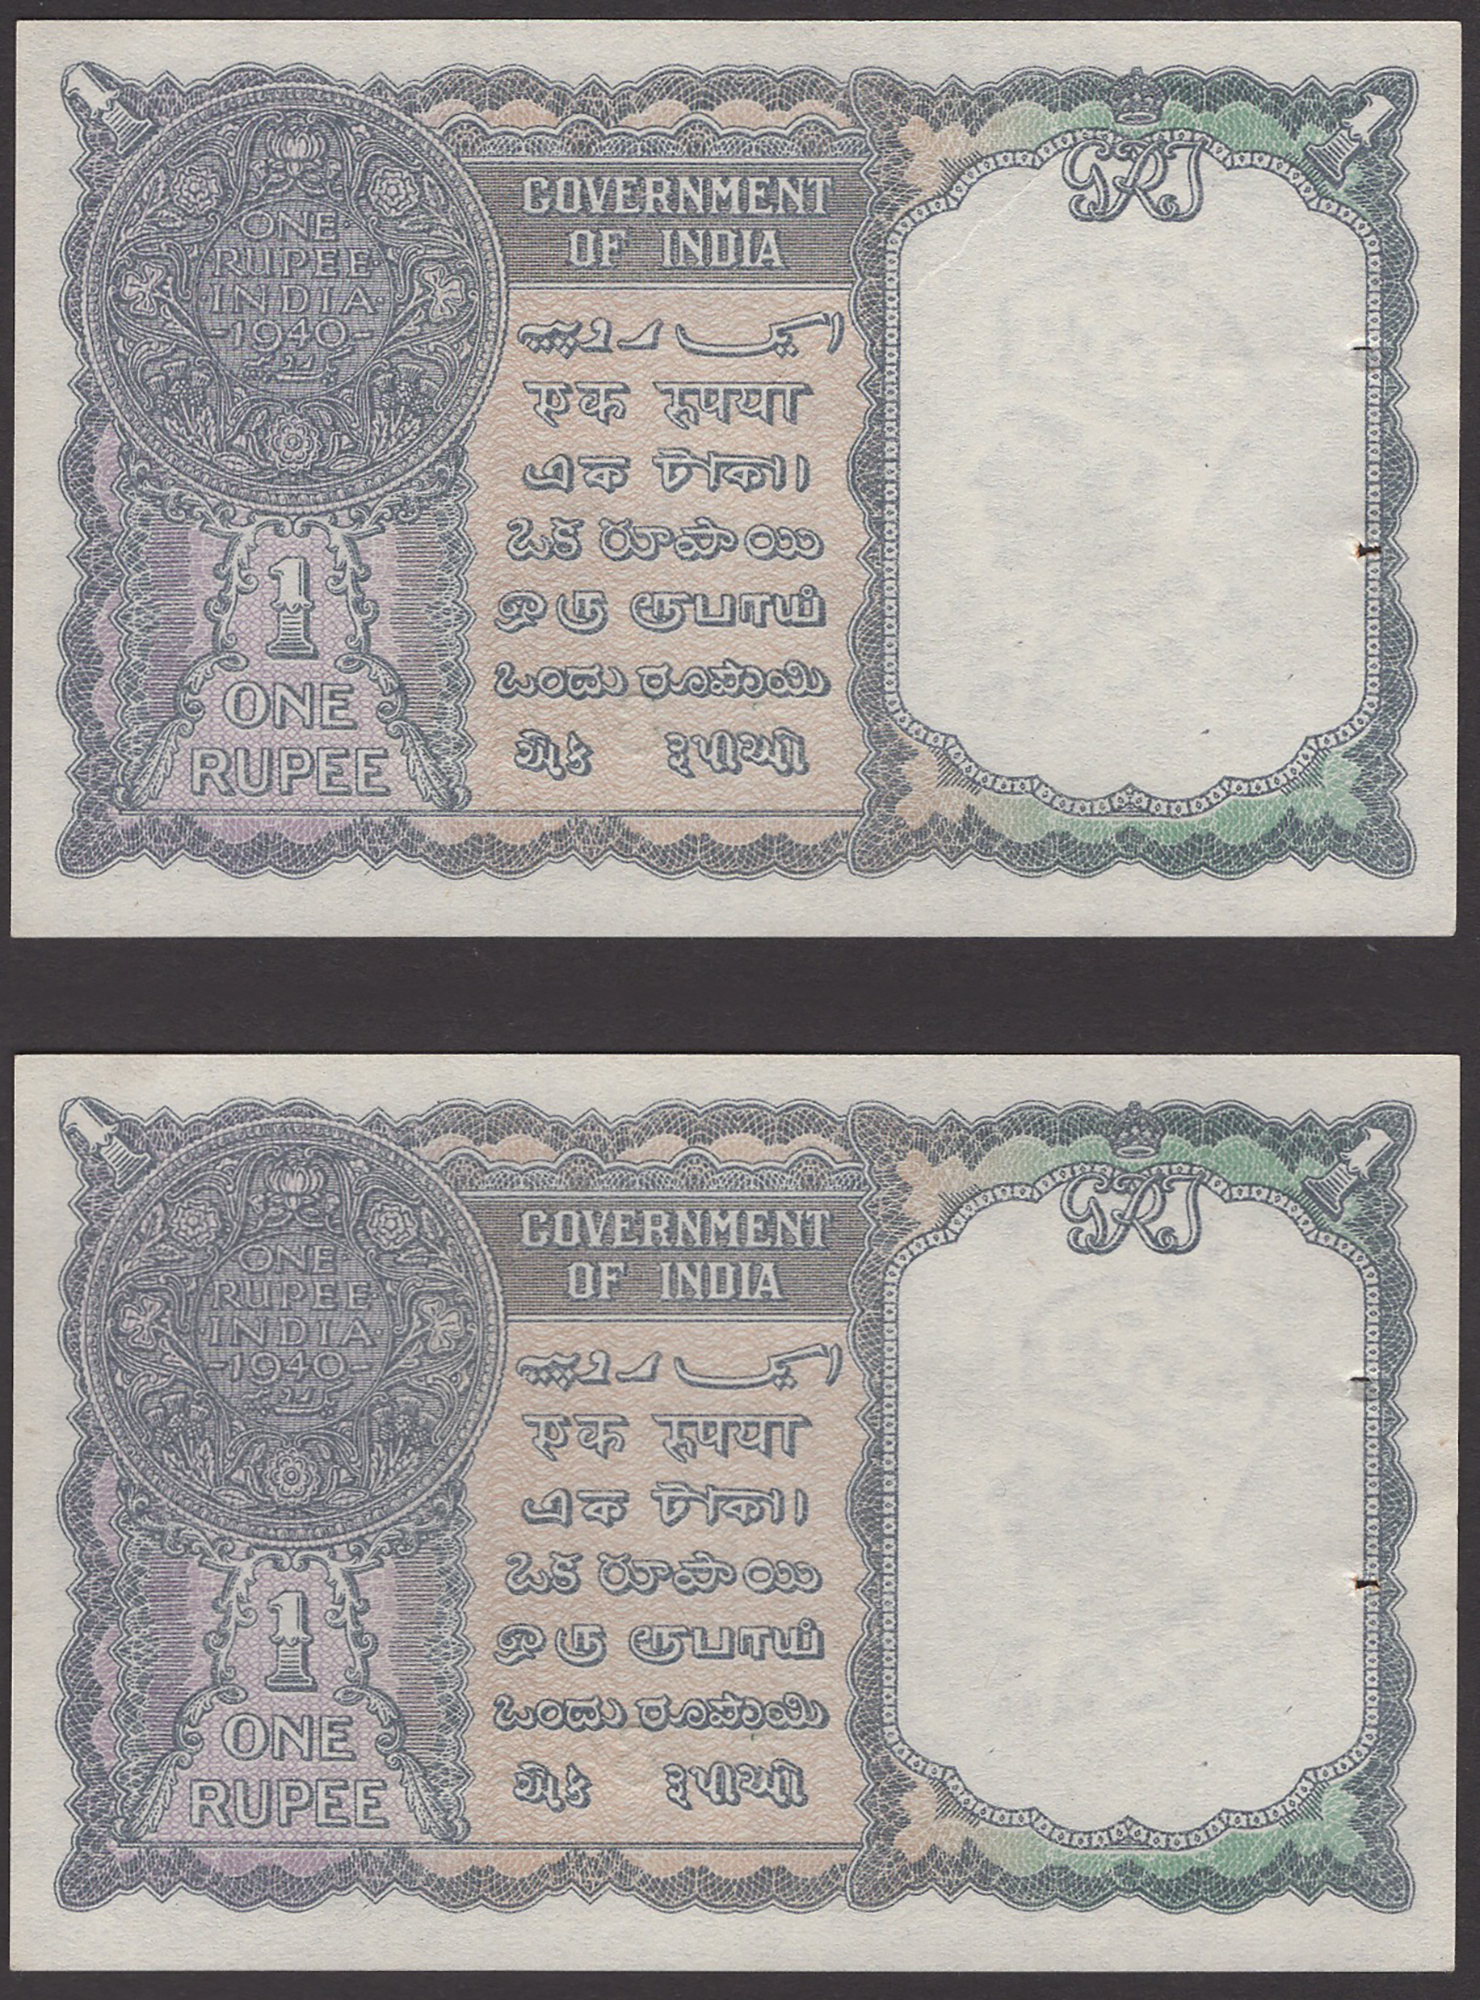 Government of India, 1 Rupee (5), 1940, serial numbers V/21 513315, V/21 513317, L/1... - Image 4 of 4